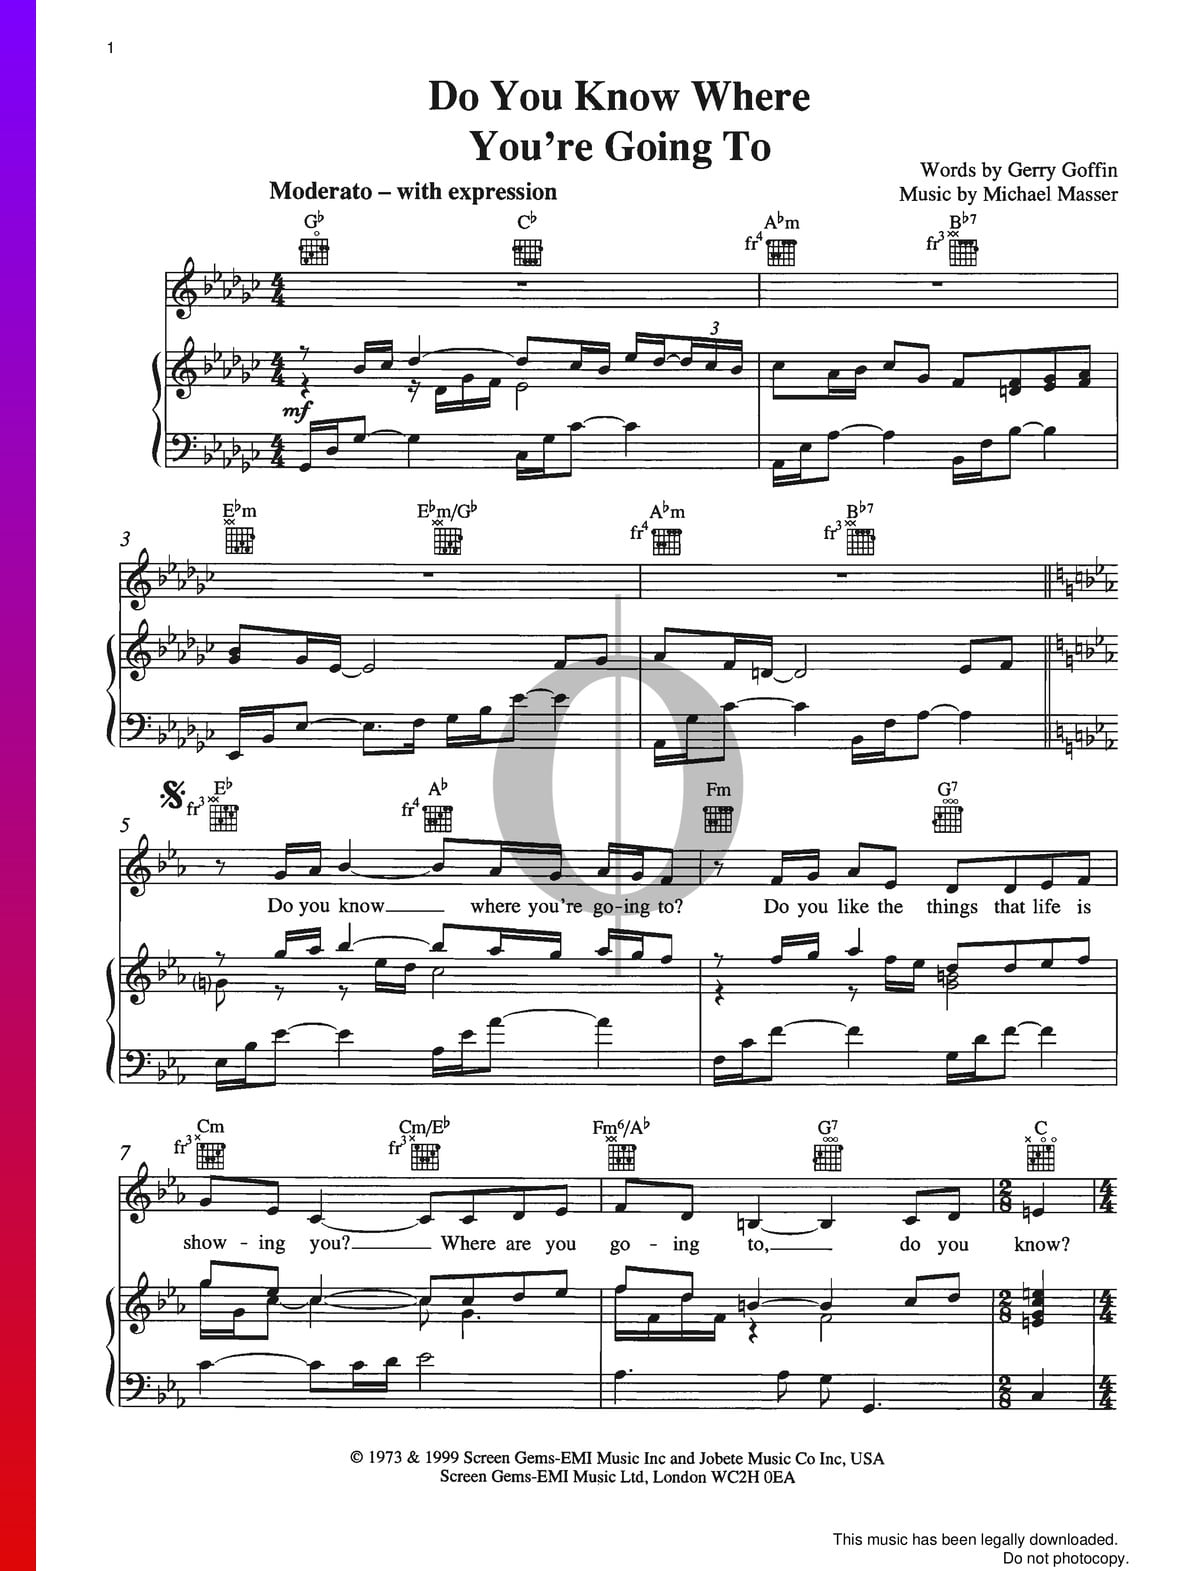 Do You Know Where You Re Going To Sheet Music Piano Voice Guitar Pdf Download Streaming Oktav